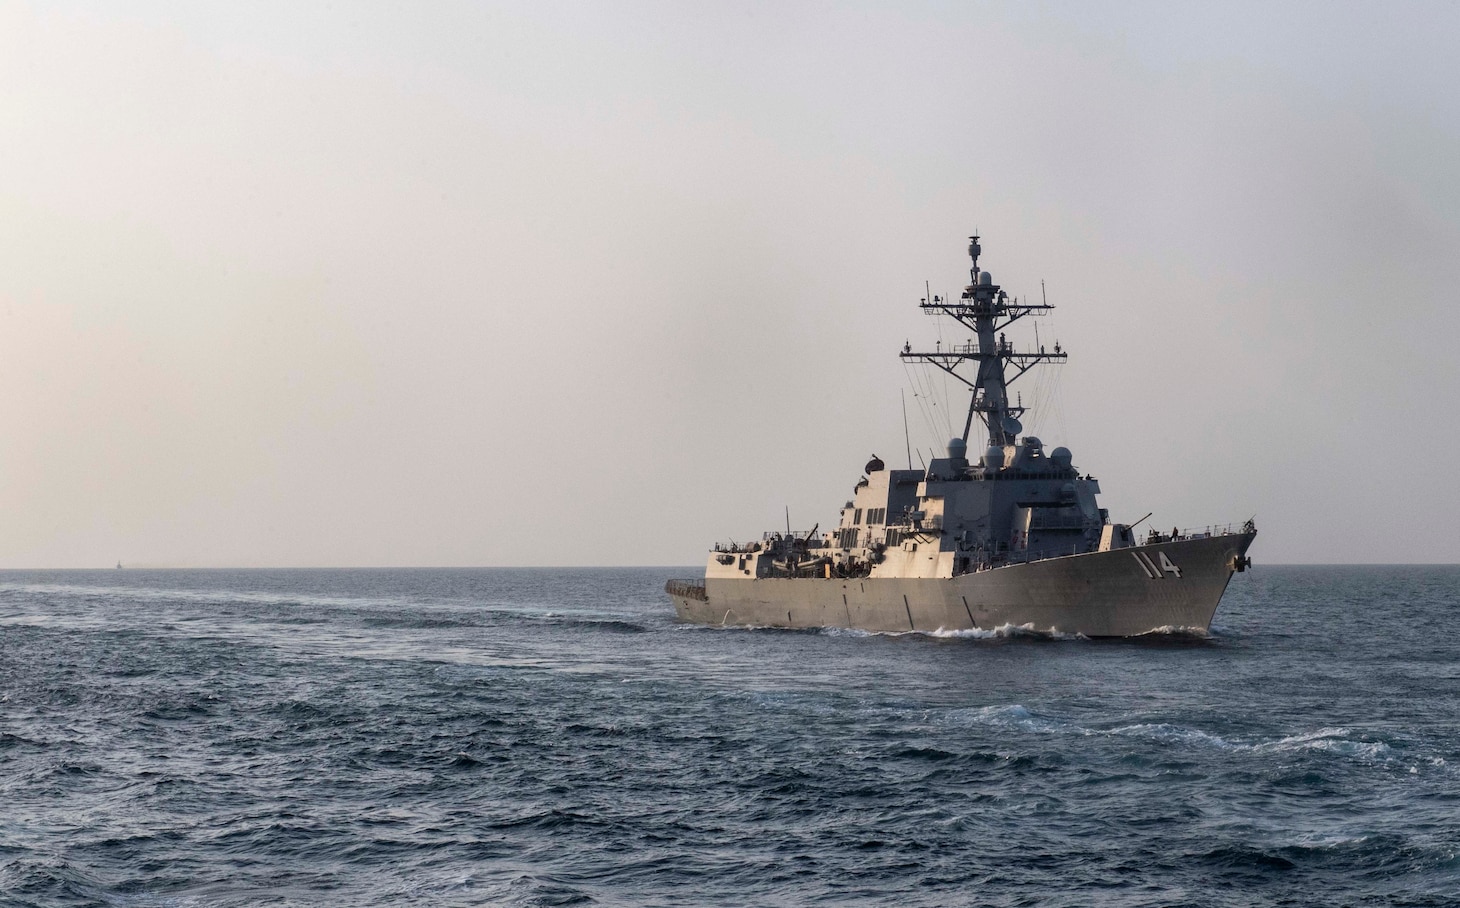 The guided-missile destroyer USS Ralph Johnson (DDG 114) transits the Arabian Gulf Aug. 27, 2020.